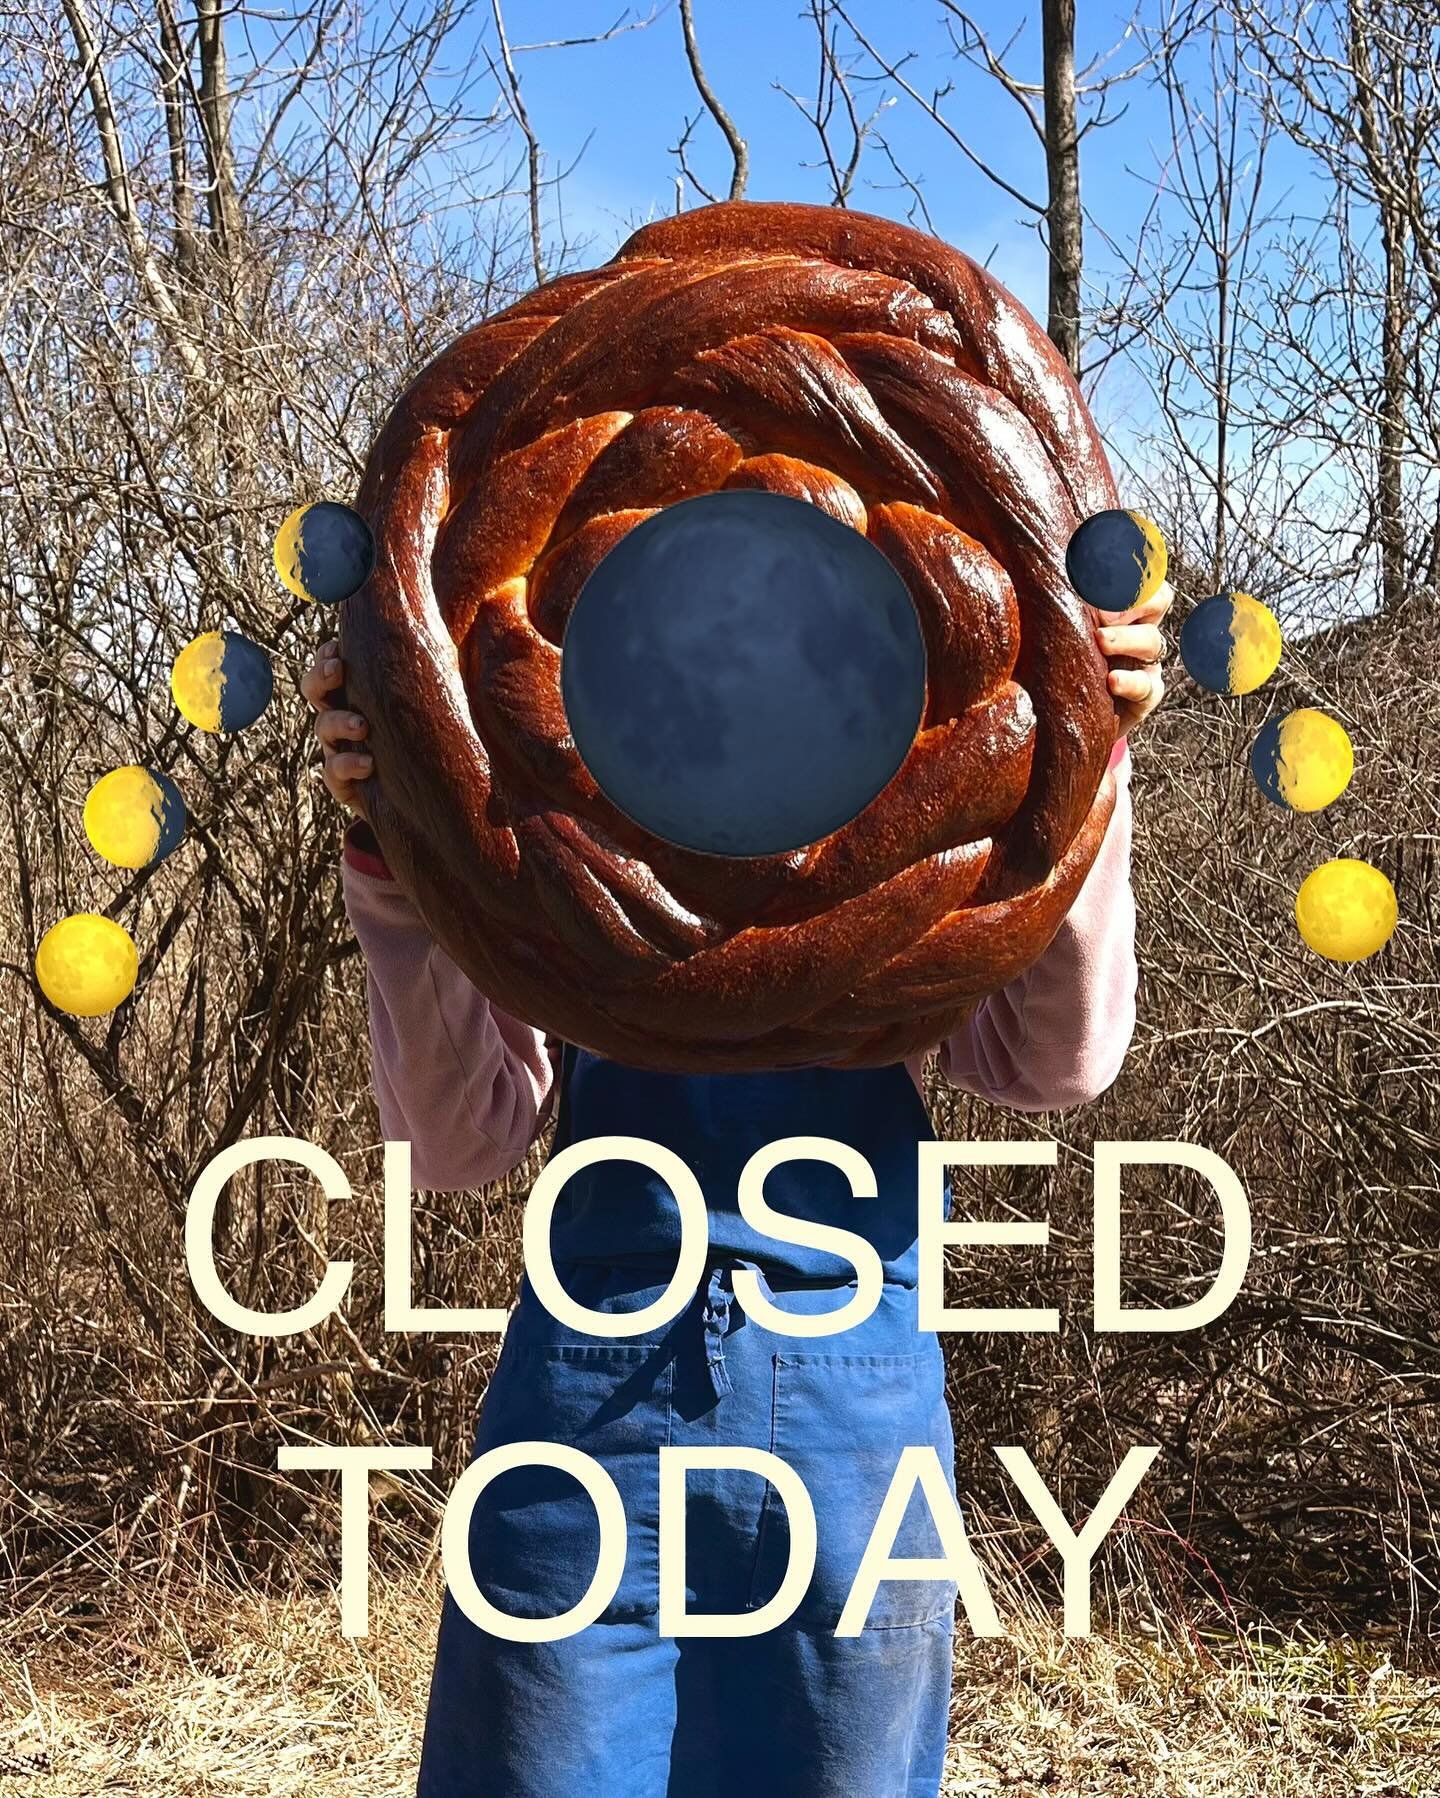 🌕Reminder: the storefront is CLOSED today!  We will see you tomorrow, with lots of goodies.🎉

Yes, we know the eclipse was yesterday- we took the day off at the bakery, and because of the long ferment schedule required to get our sourdough as delic